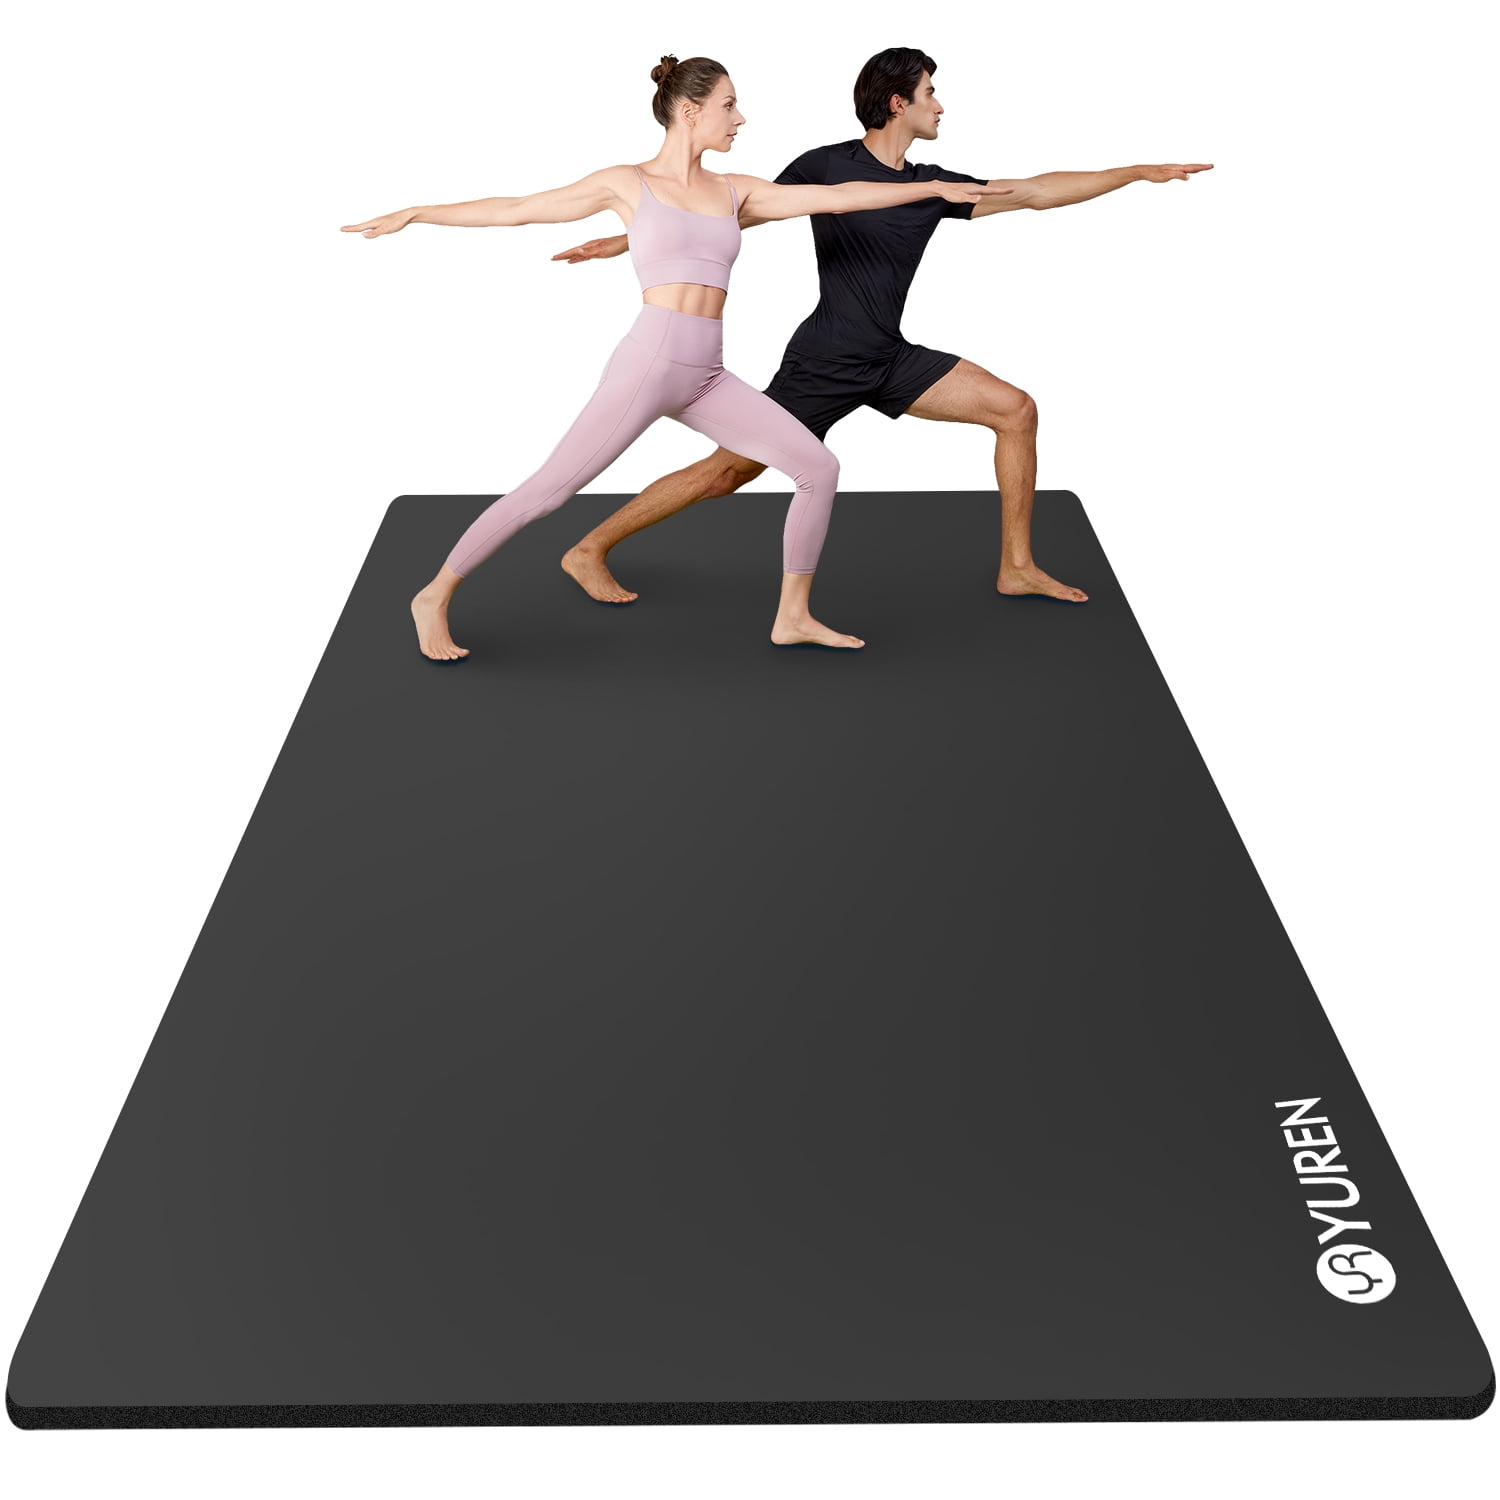 YR Large Exercise Mat 6' x 4' 10mm Thick NBR Stretching Yoga Pilates  Workout for Home Gym Black